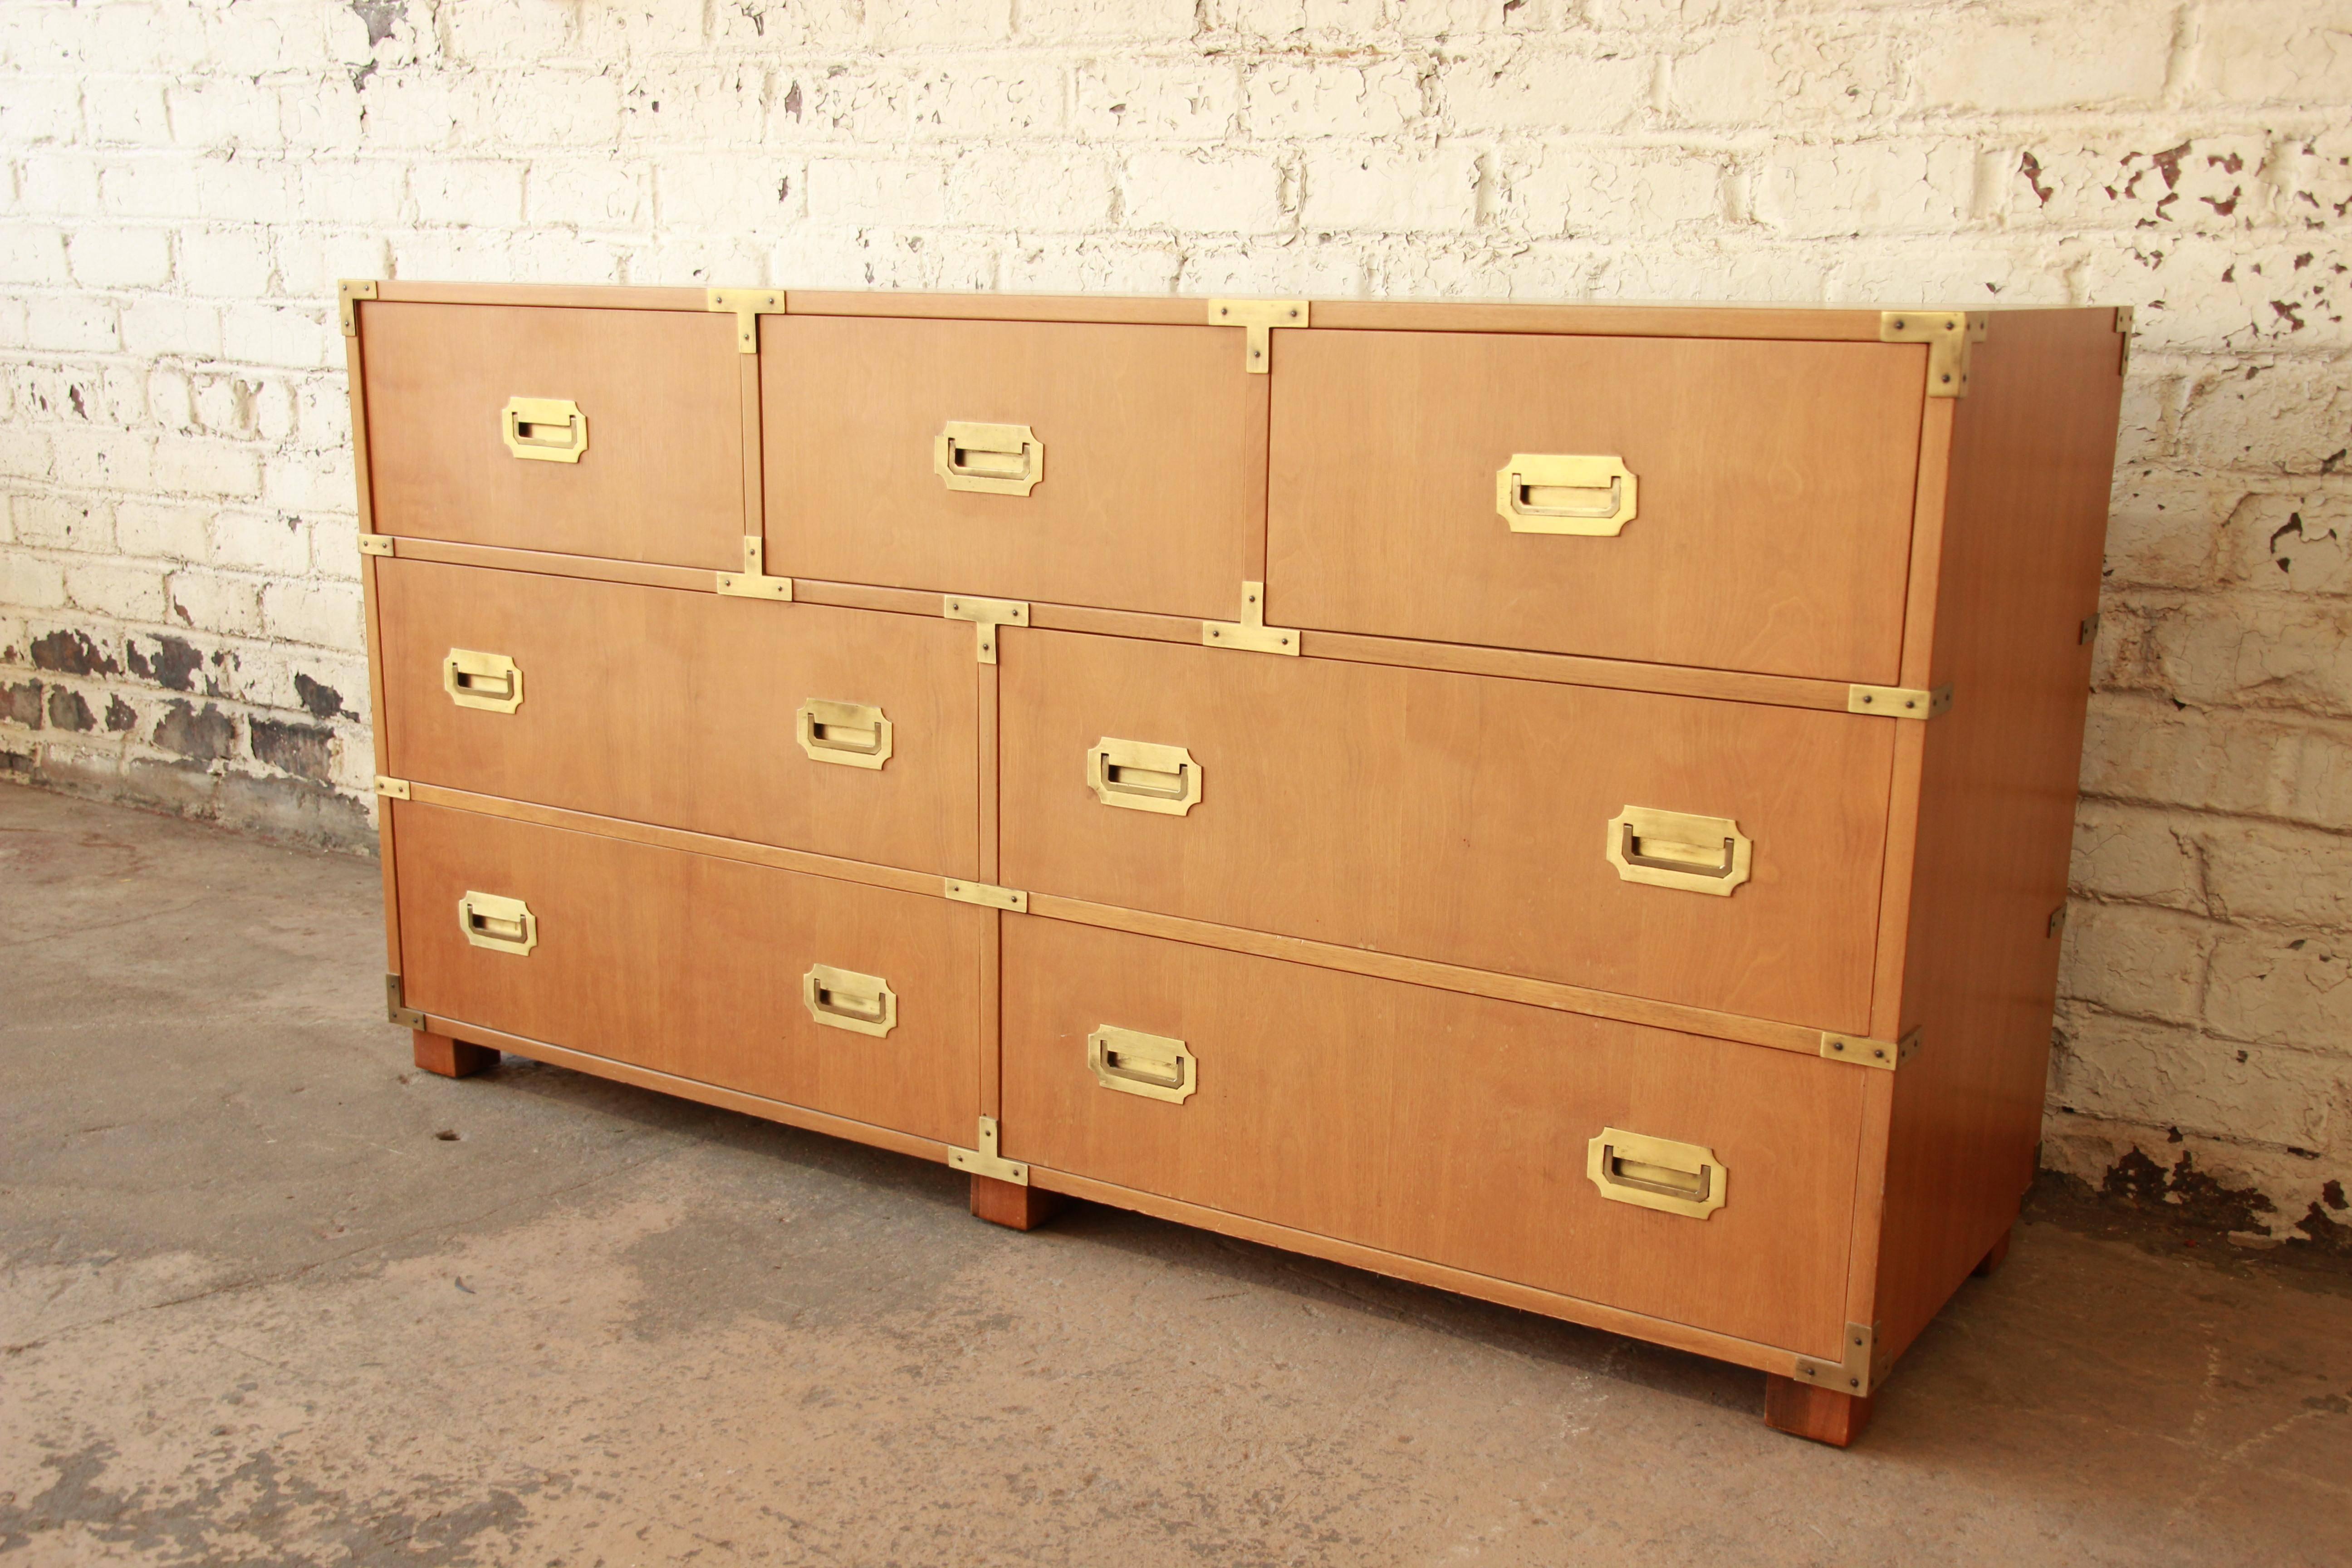 Offering a gorgeous Mid-Century Campaign style chest of drawers by Baker Furniture. The dresser features stunning bleached walnut wood grain and clean brass hardware. It offers ample room for storage with seven deep dovetailed drawers, with a unique